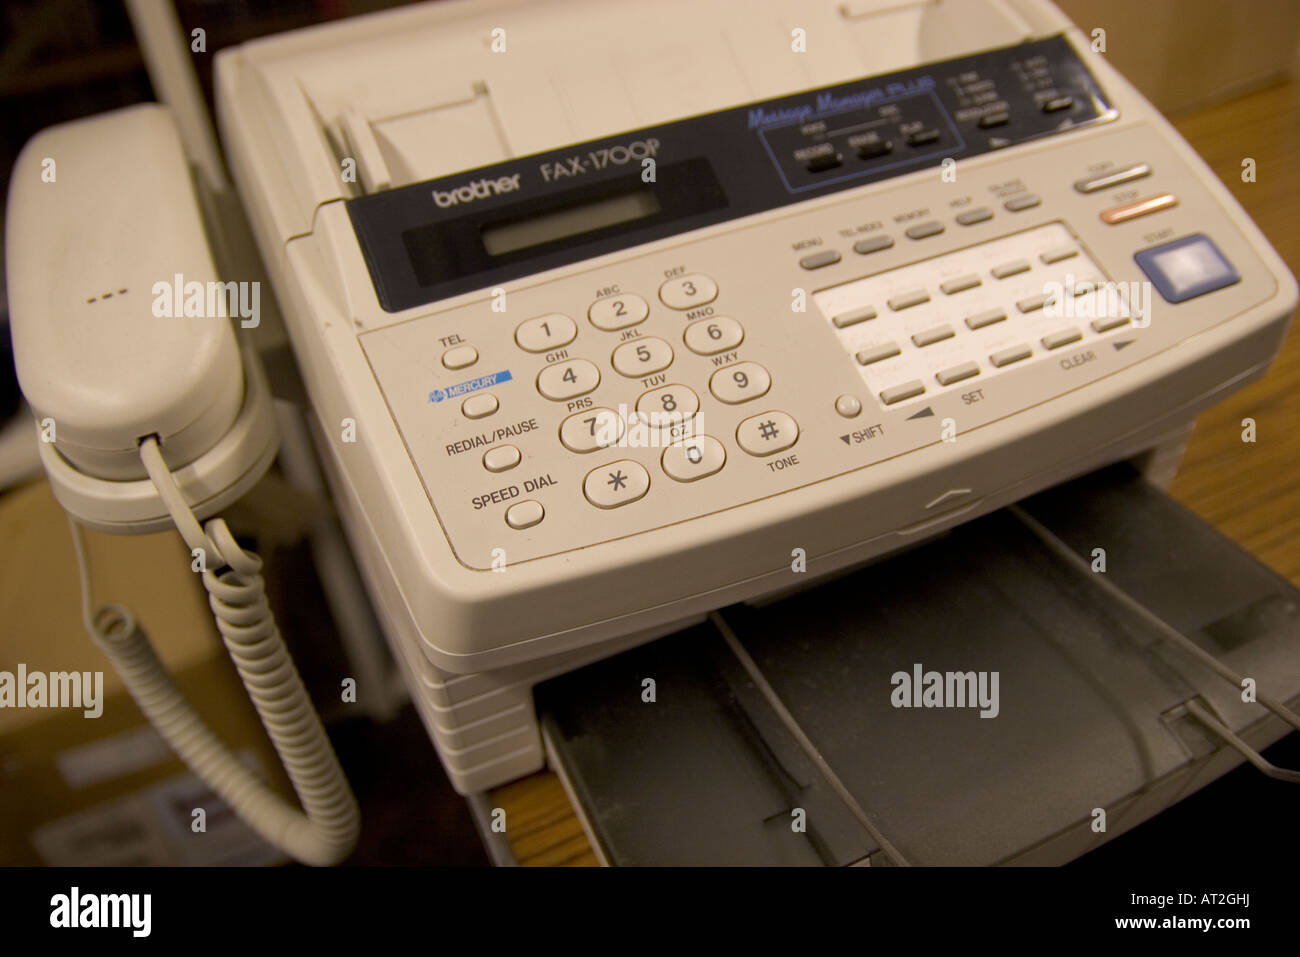 office telephone fax and answering machine Stock Photo